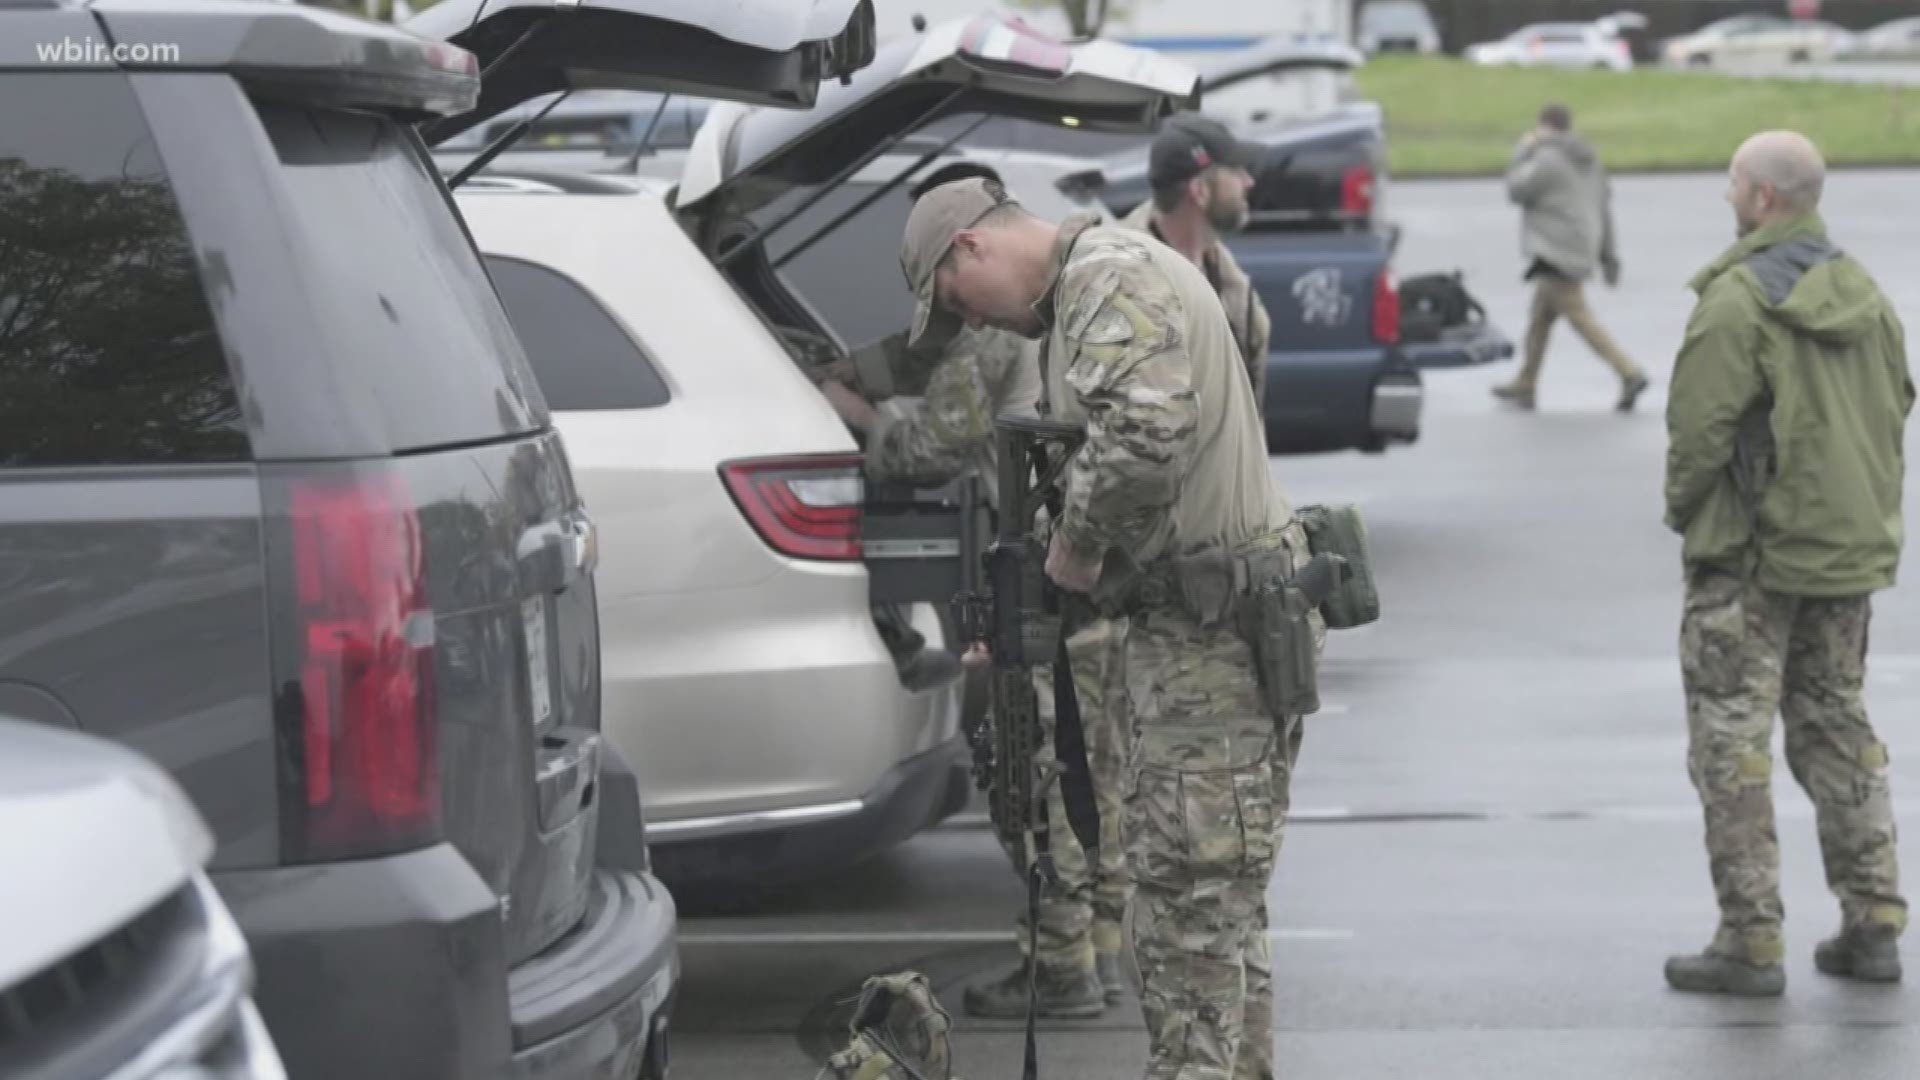 Officers with Nashville police and the ATF were using Burnette Chapel Church of Christ as a staging area Monday morning, with a SWAT truck and other vehicles stationed in the parking lot.